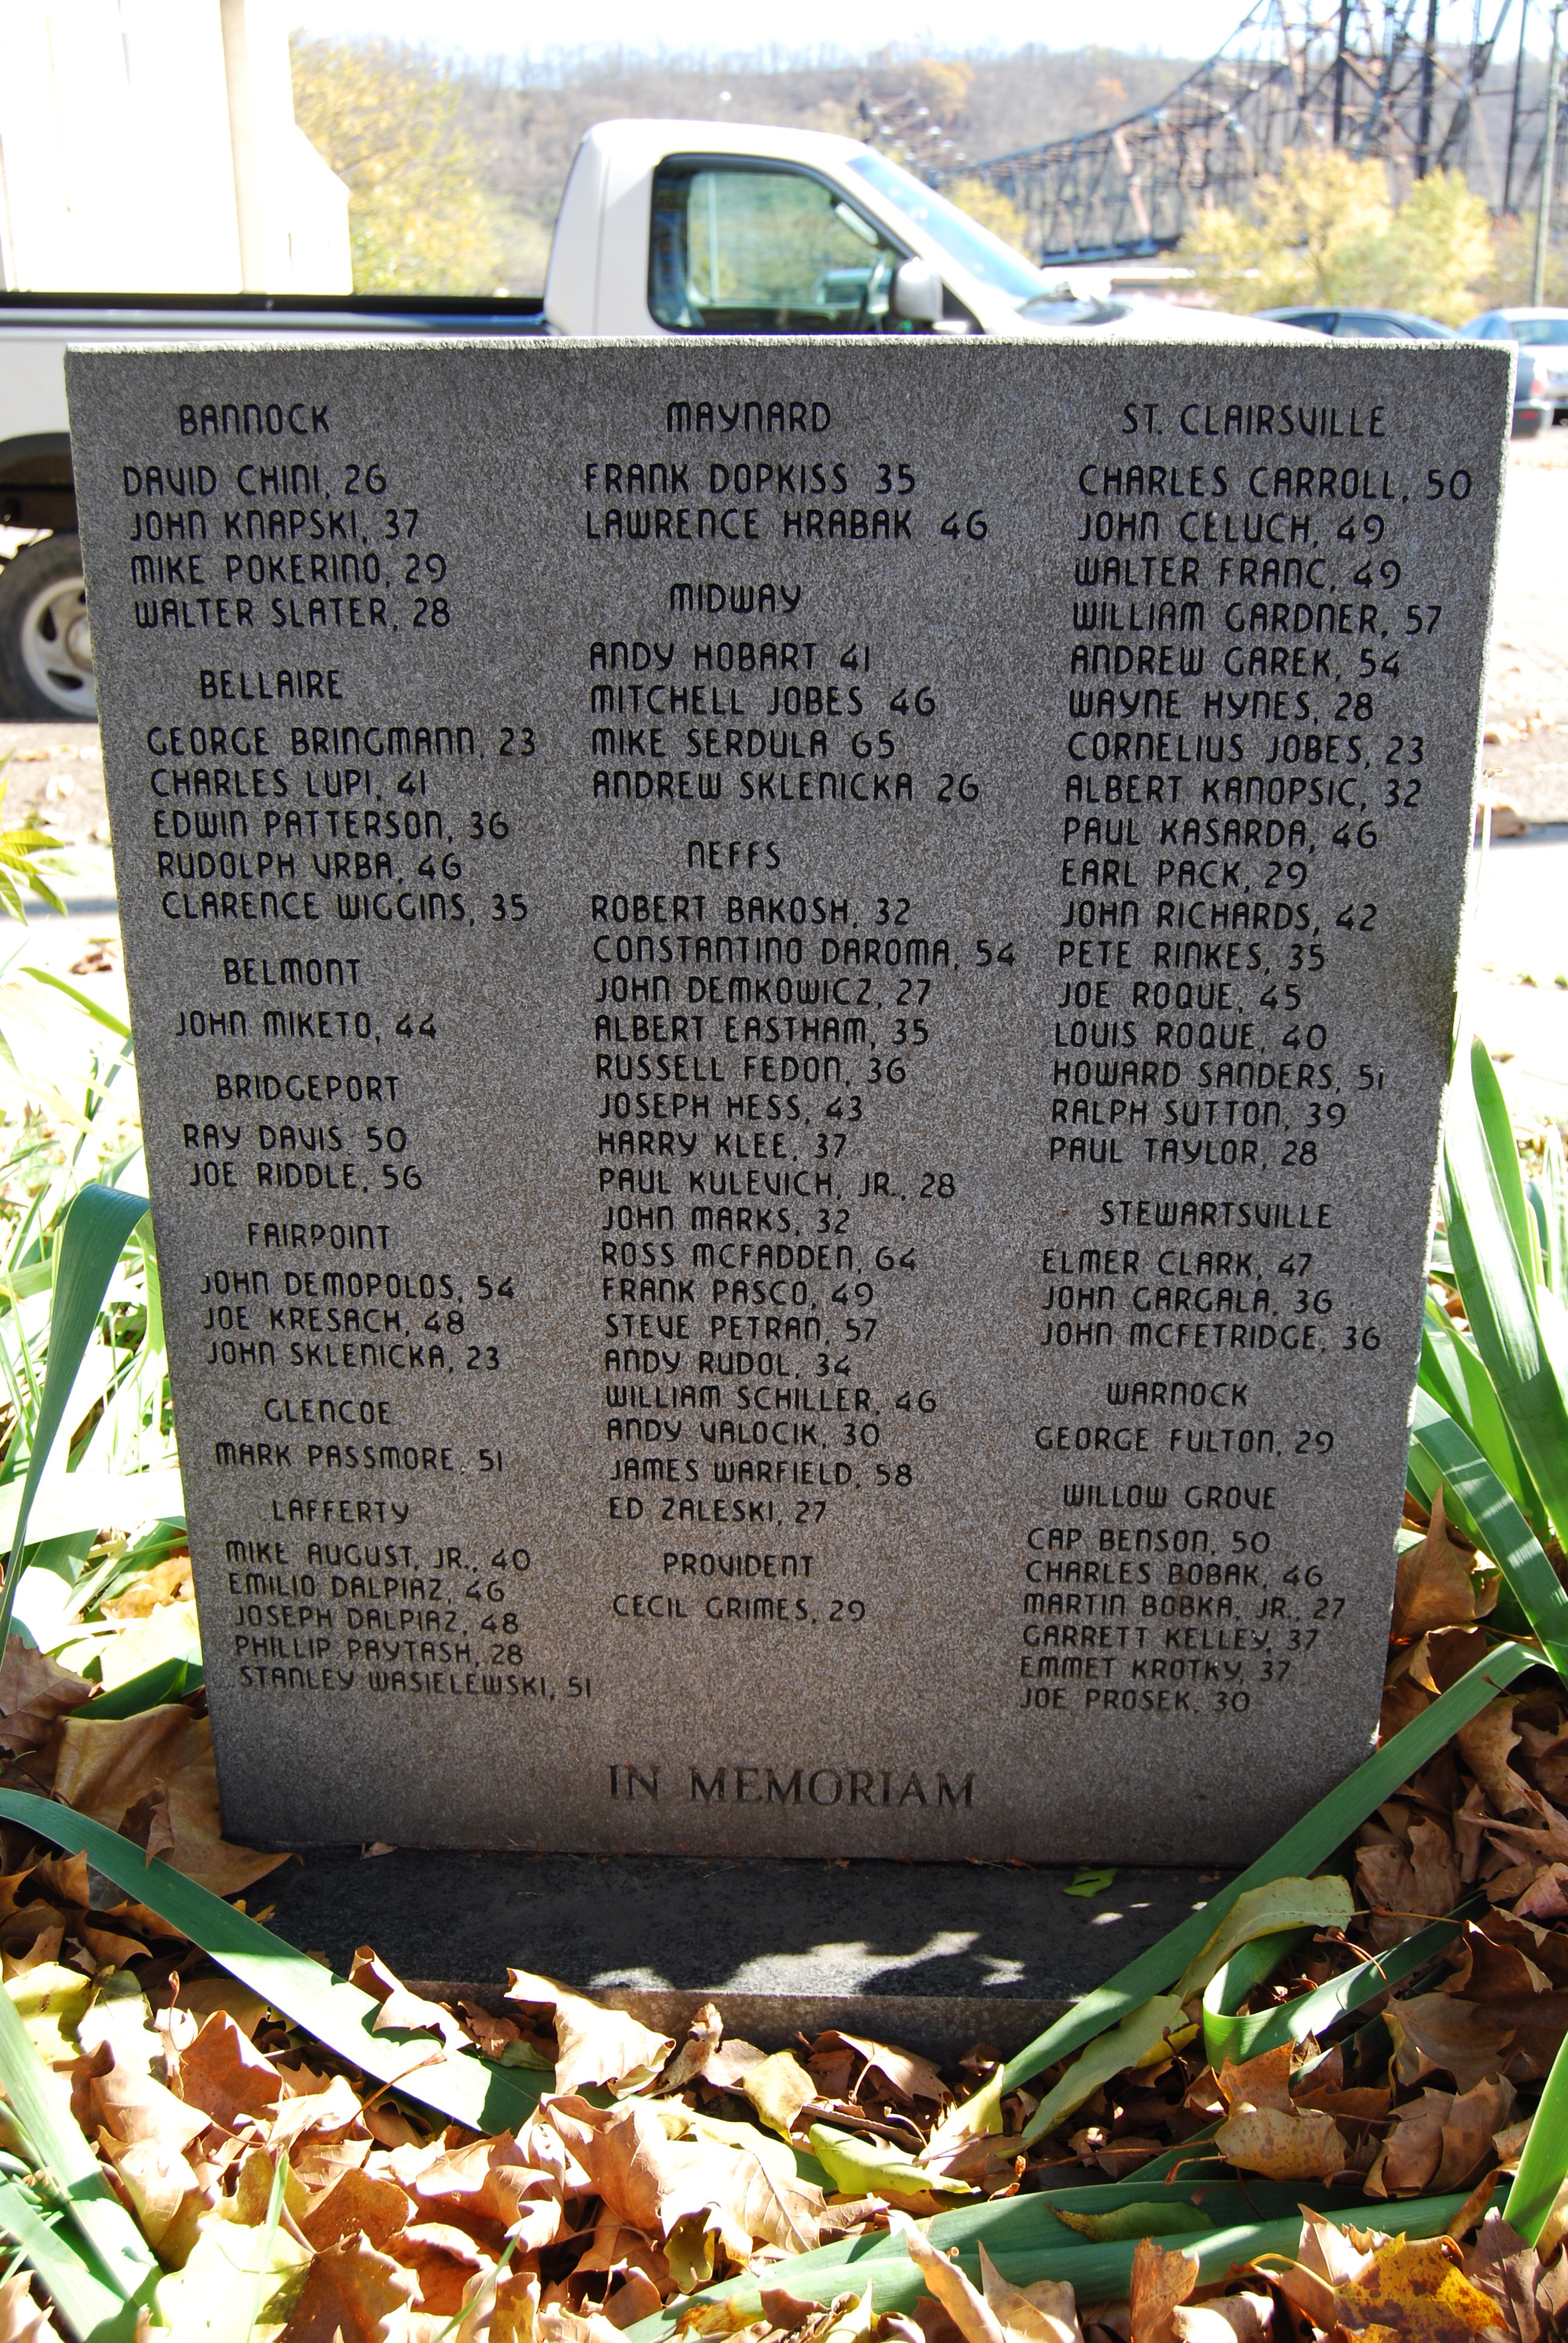 Willow Grove Mine Marker-Names of Victims